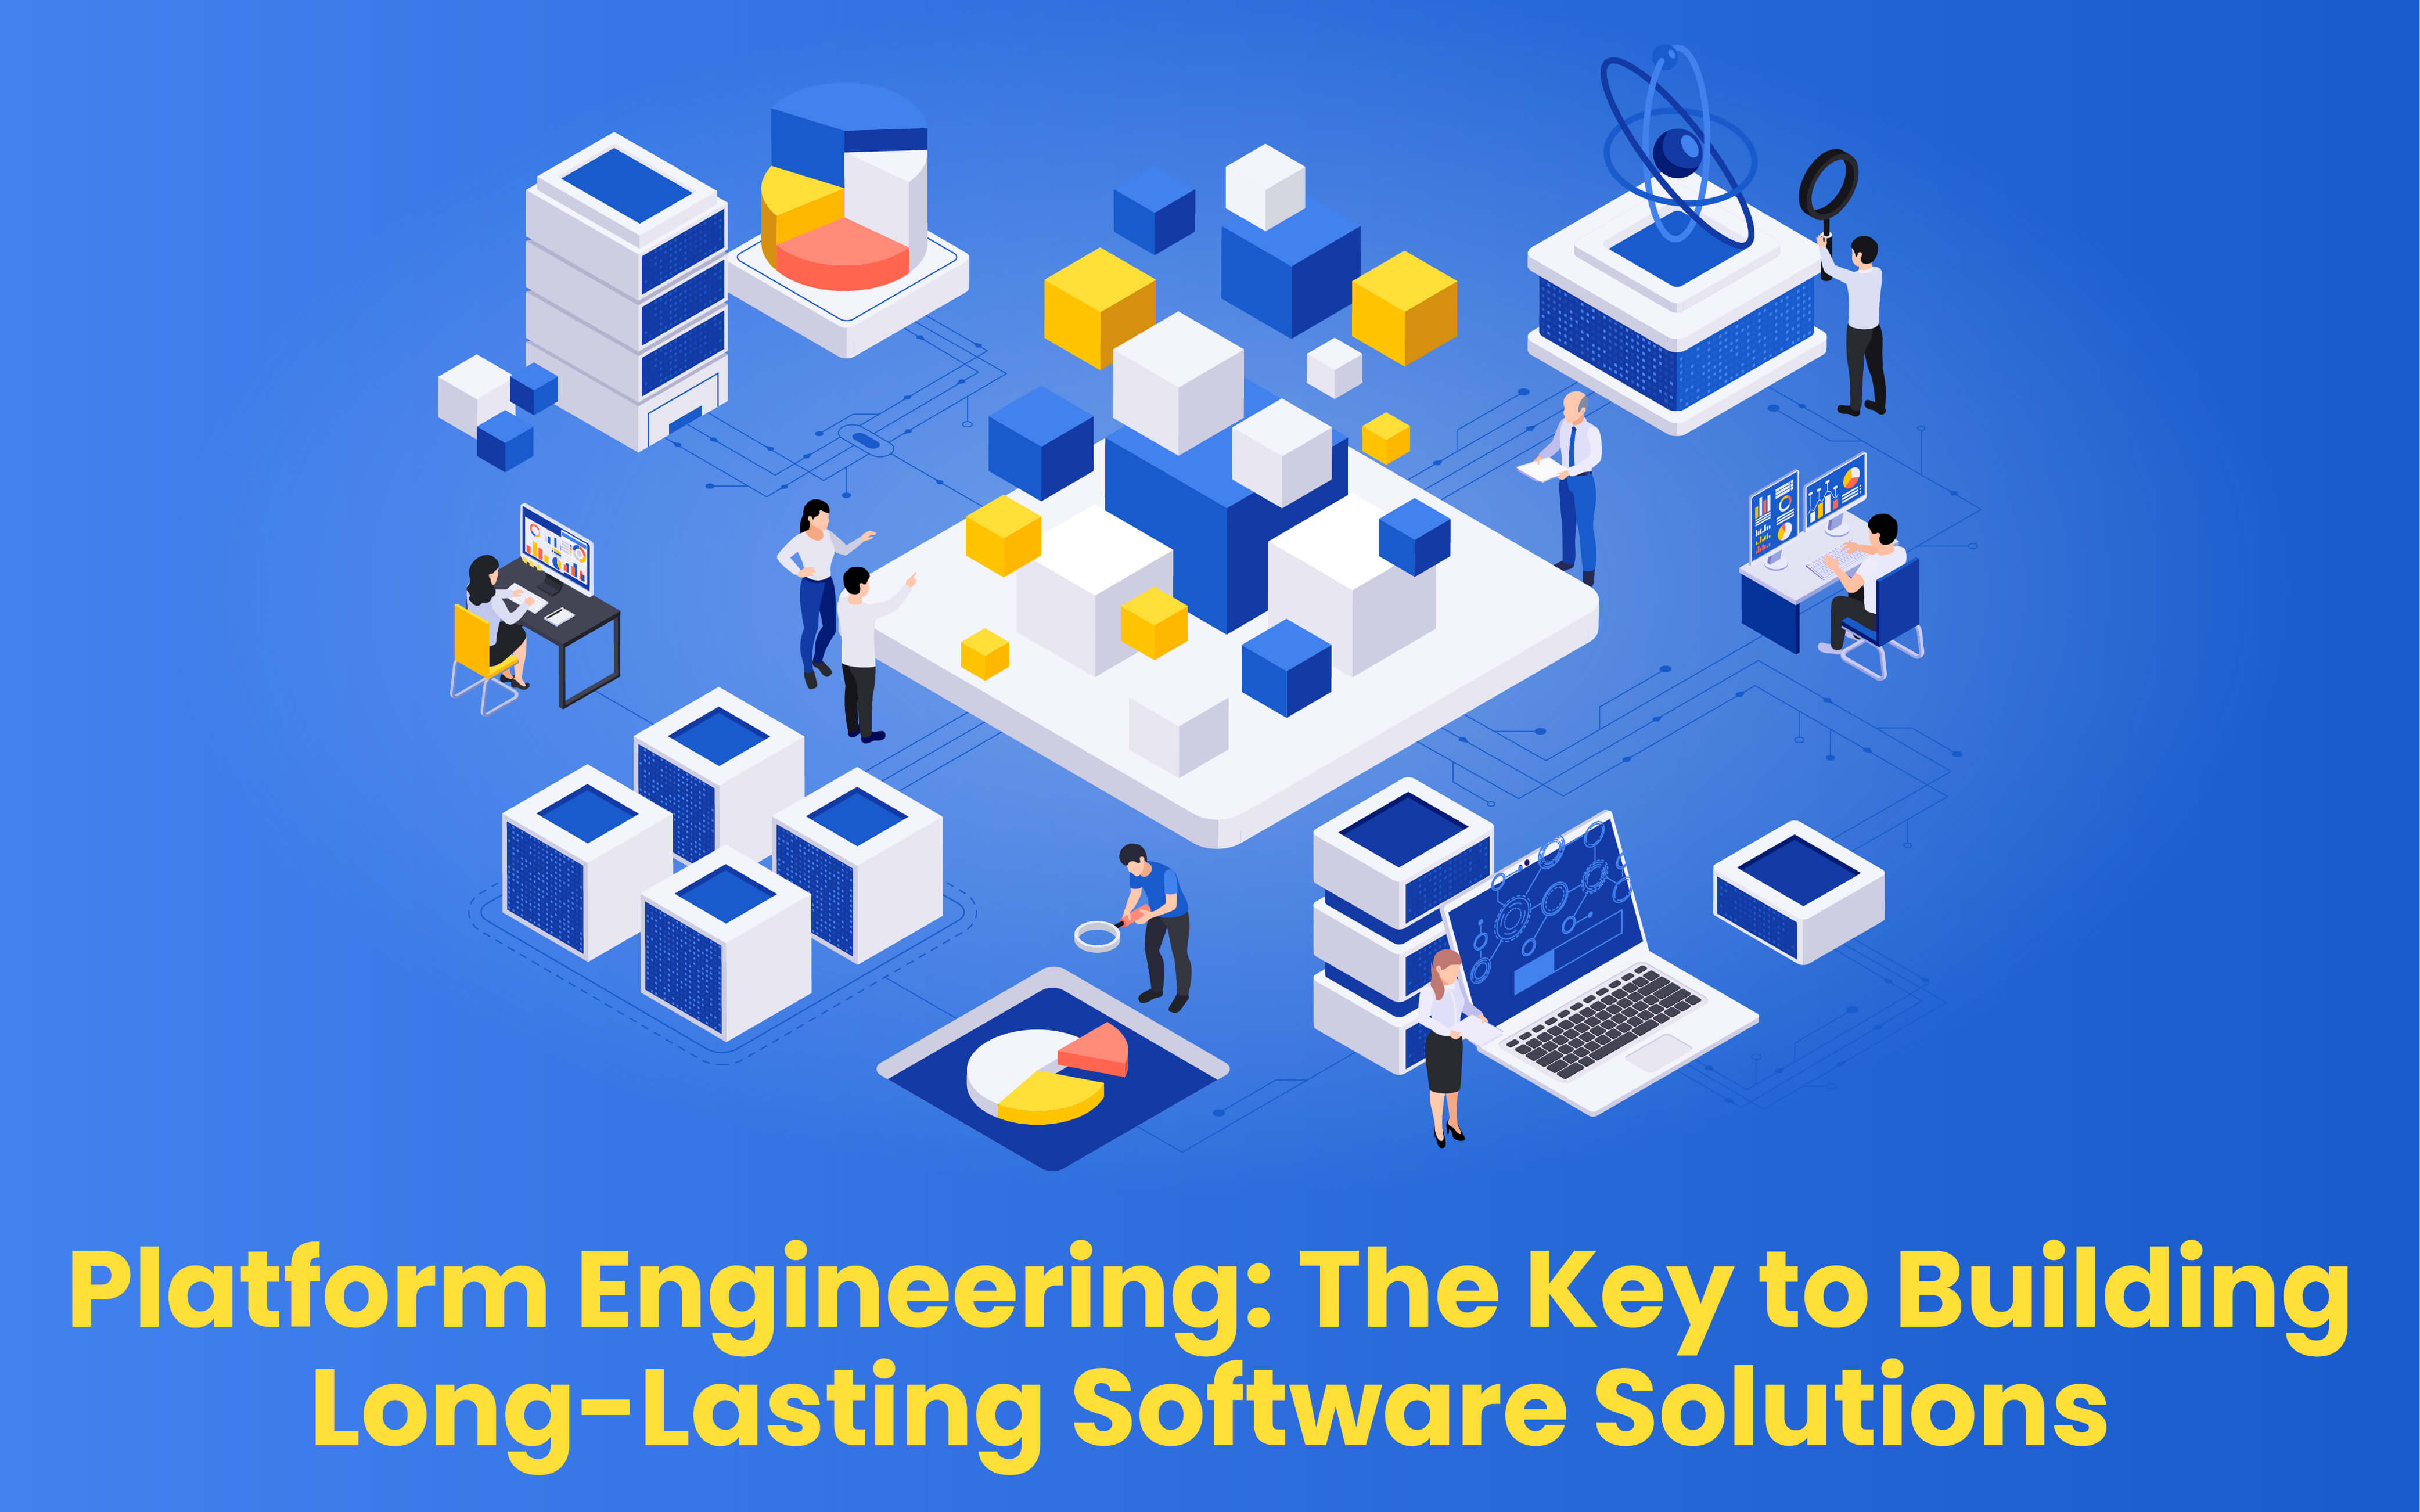 Platform Engineering: The Key to Building Long-Lasting Software Solutions